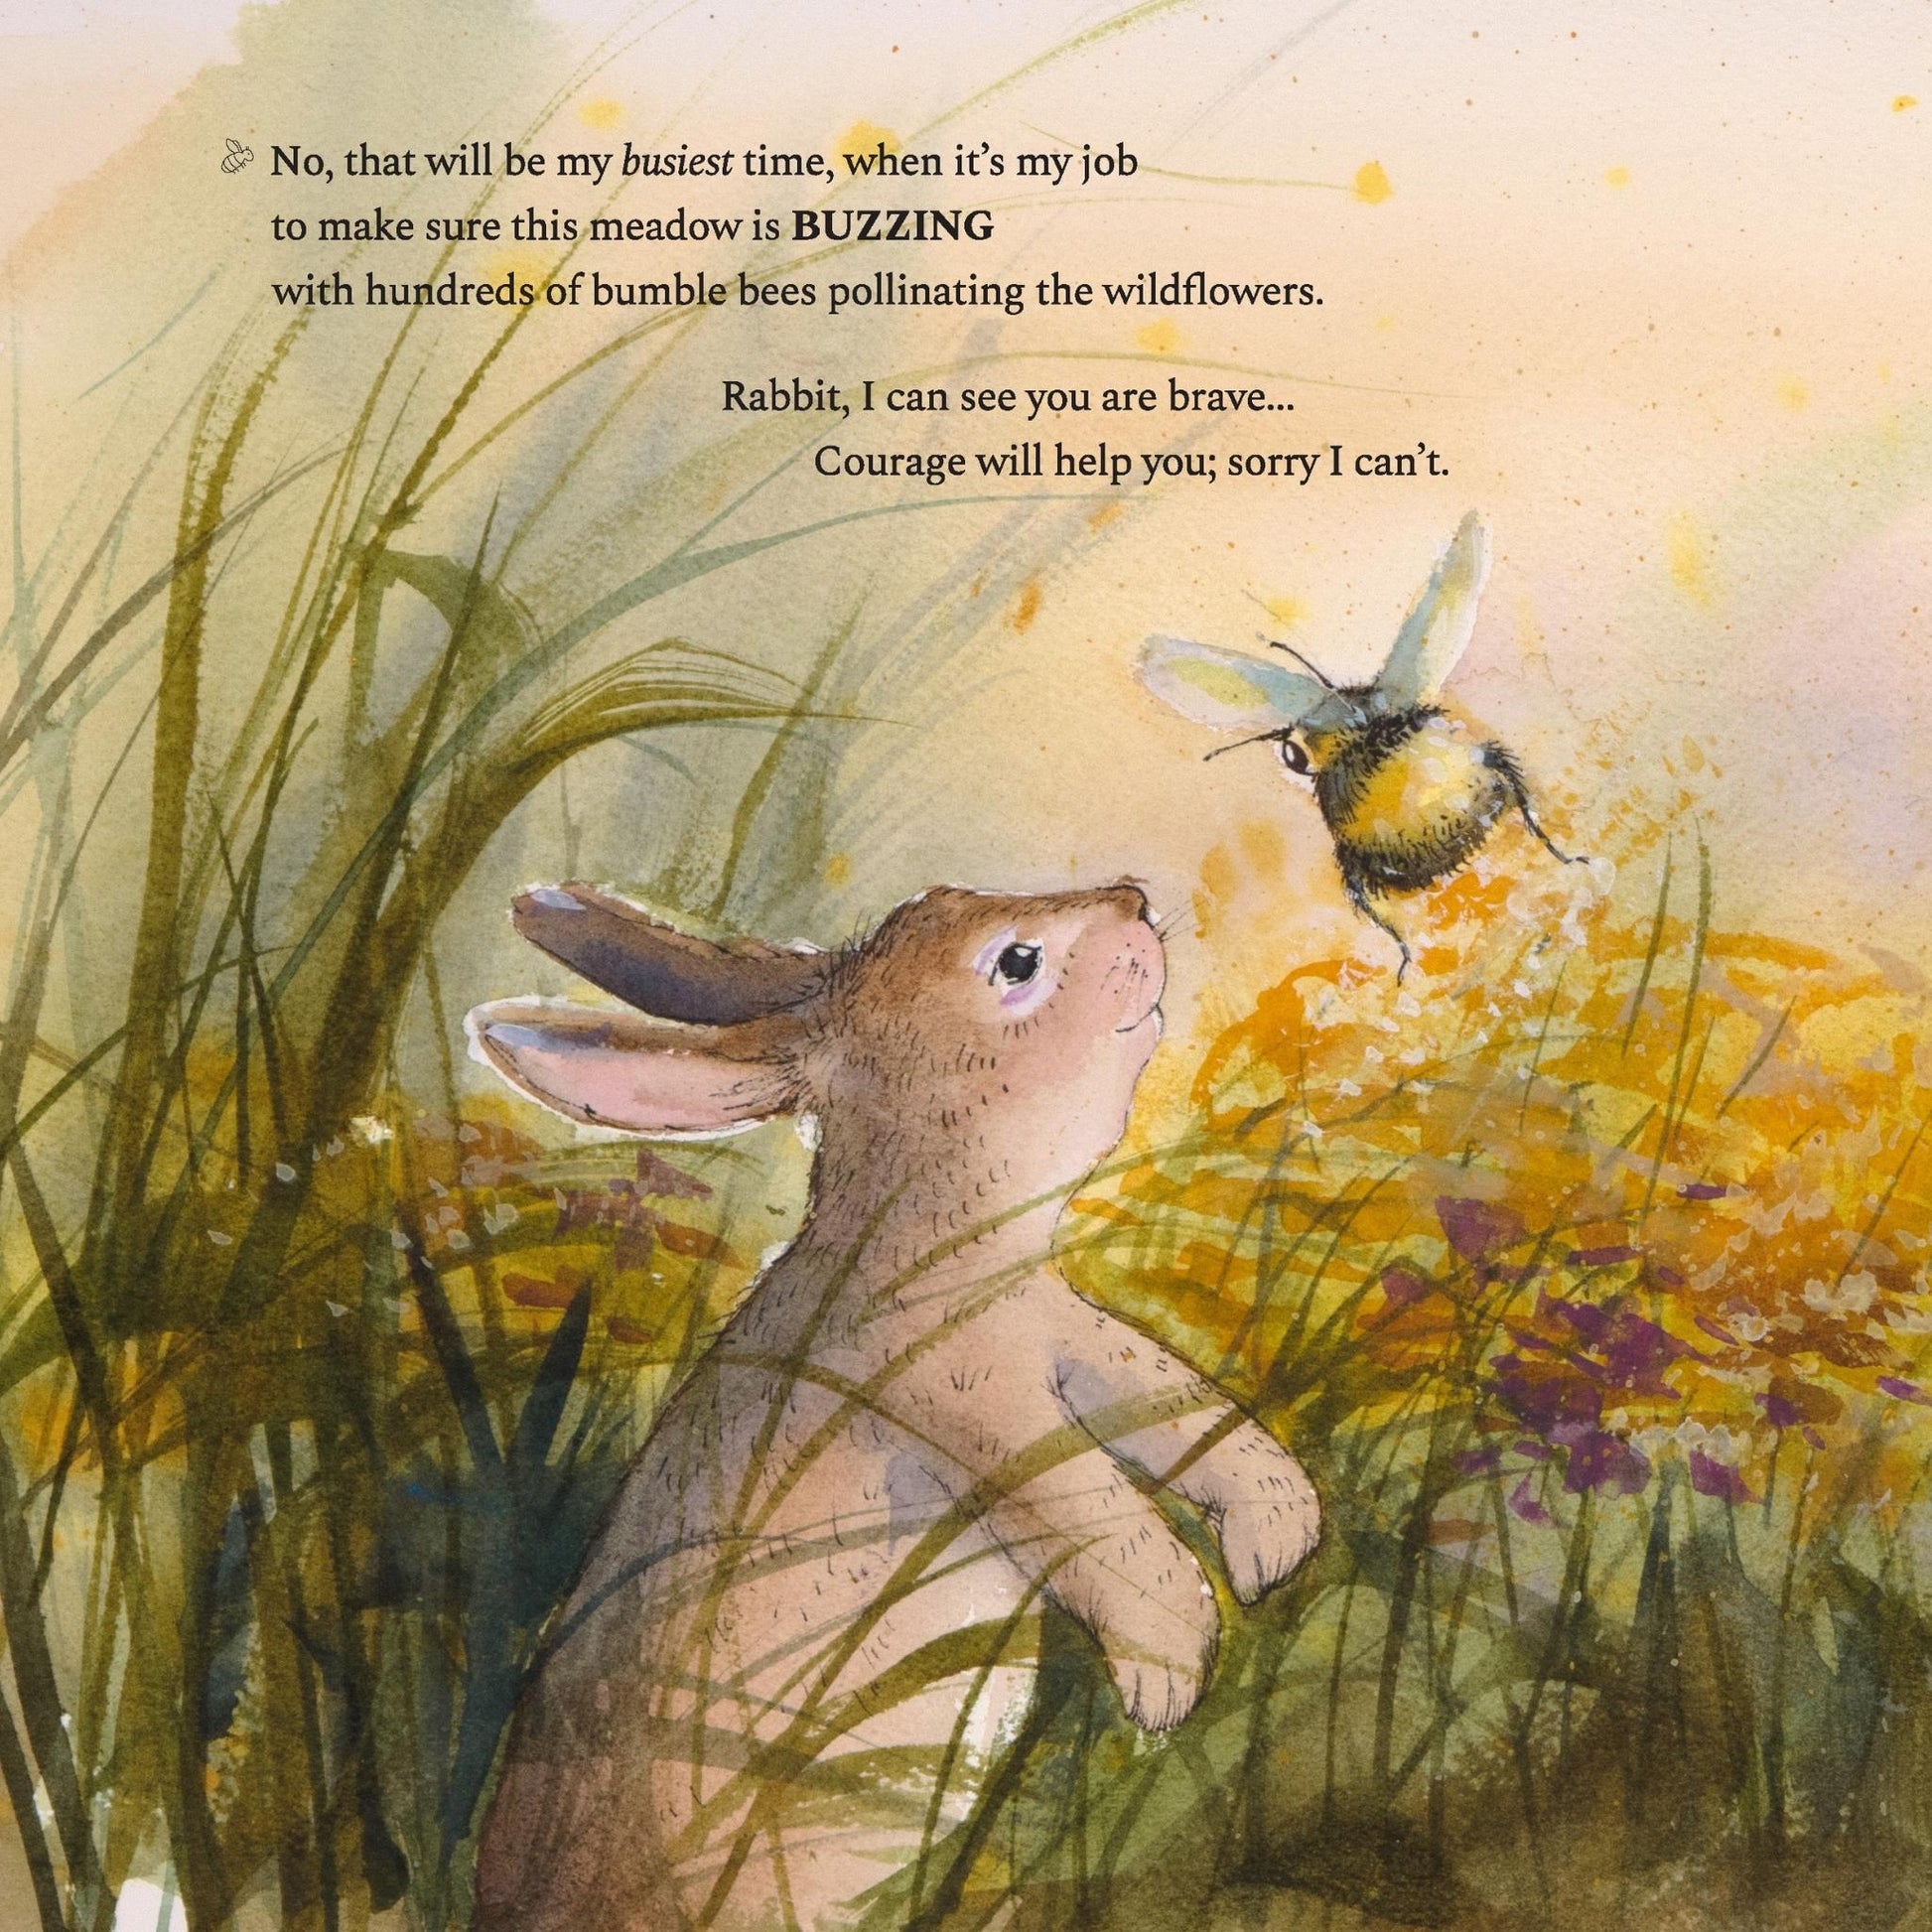 New England Cottontail Rabbit with a bumble bee in meadow from Hop Onward Rabbit Rabbit children's book